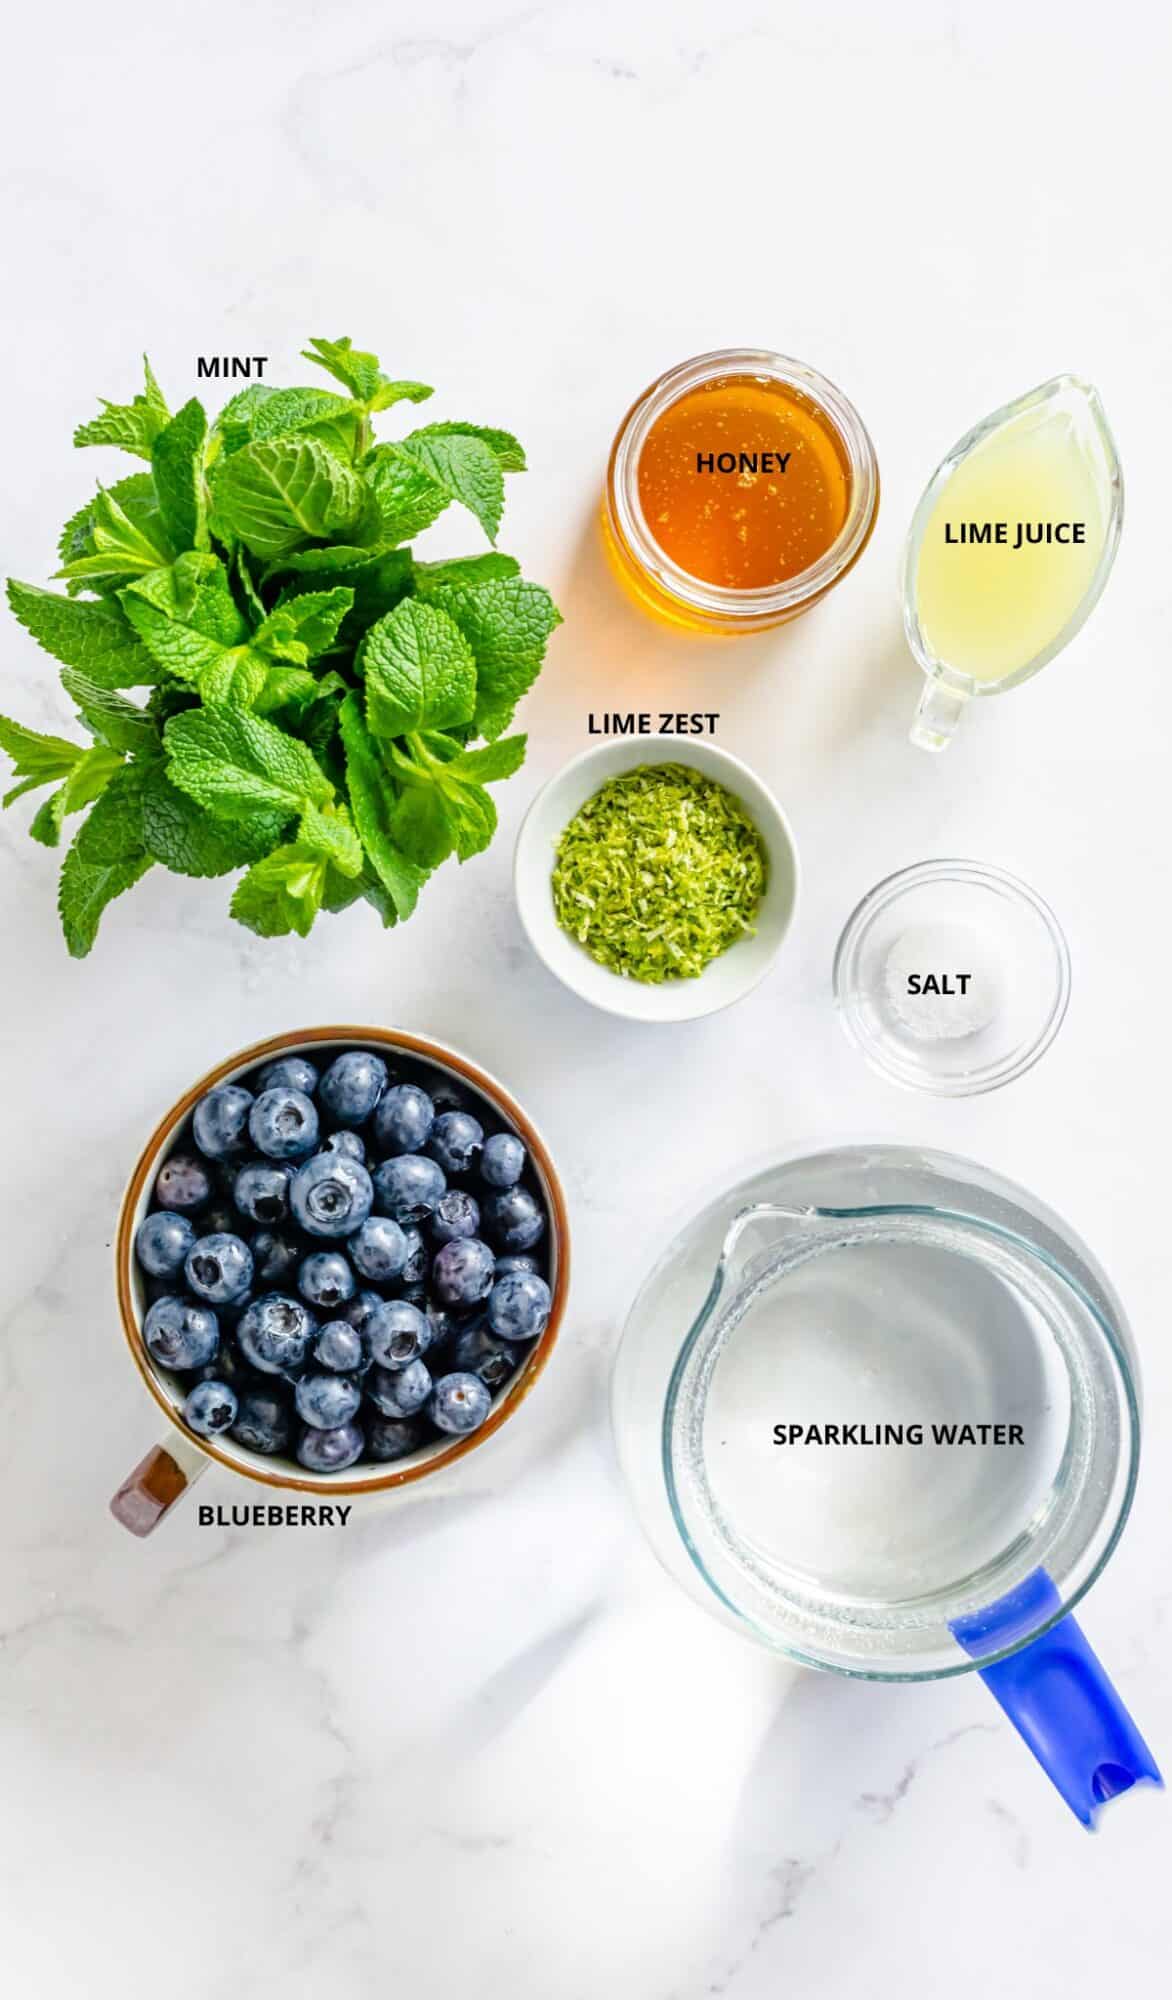 Fresh mint, honey in a jar, fresh lime juice in a clear cup, lime zest in white shallow bowl, pinch of salt in clear small bowl, sparkling water in a clear pitcher, fresh blueberries in a white and brown mug.